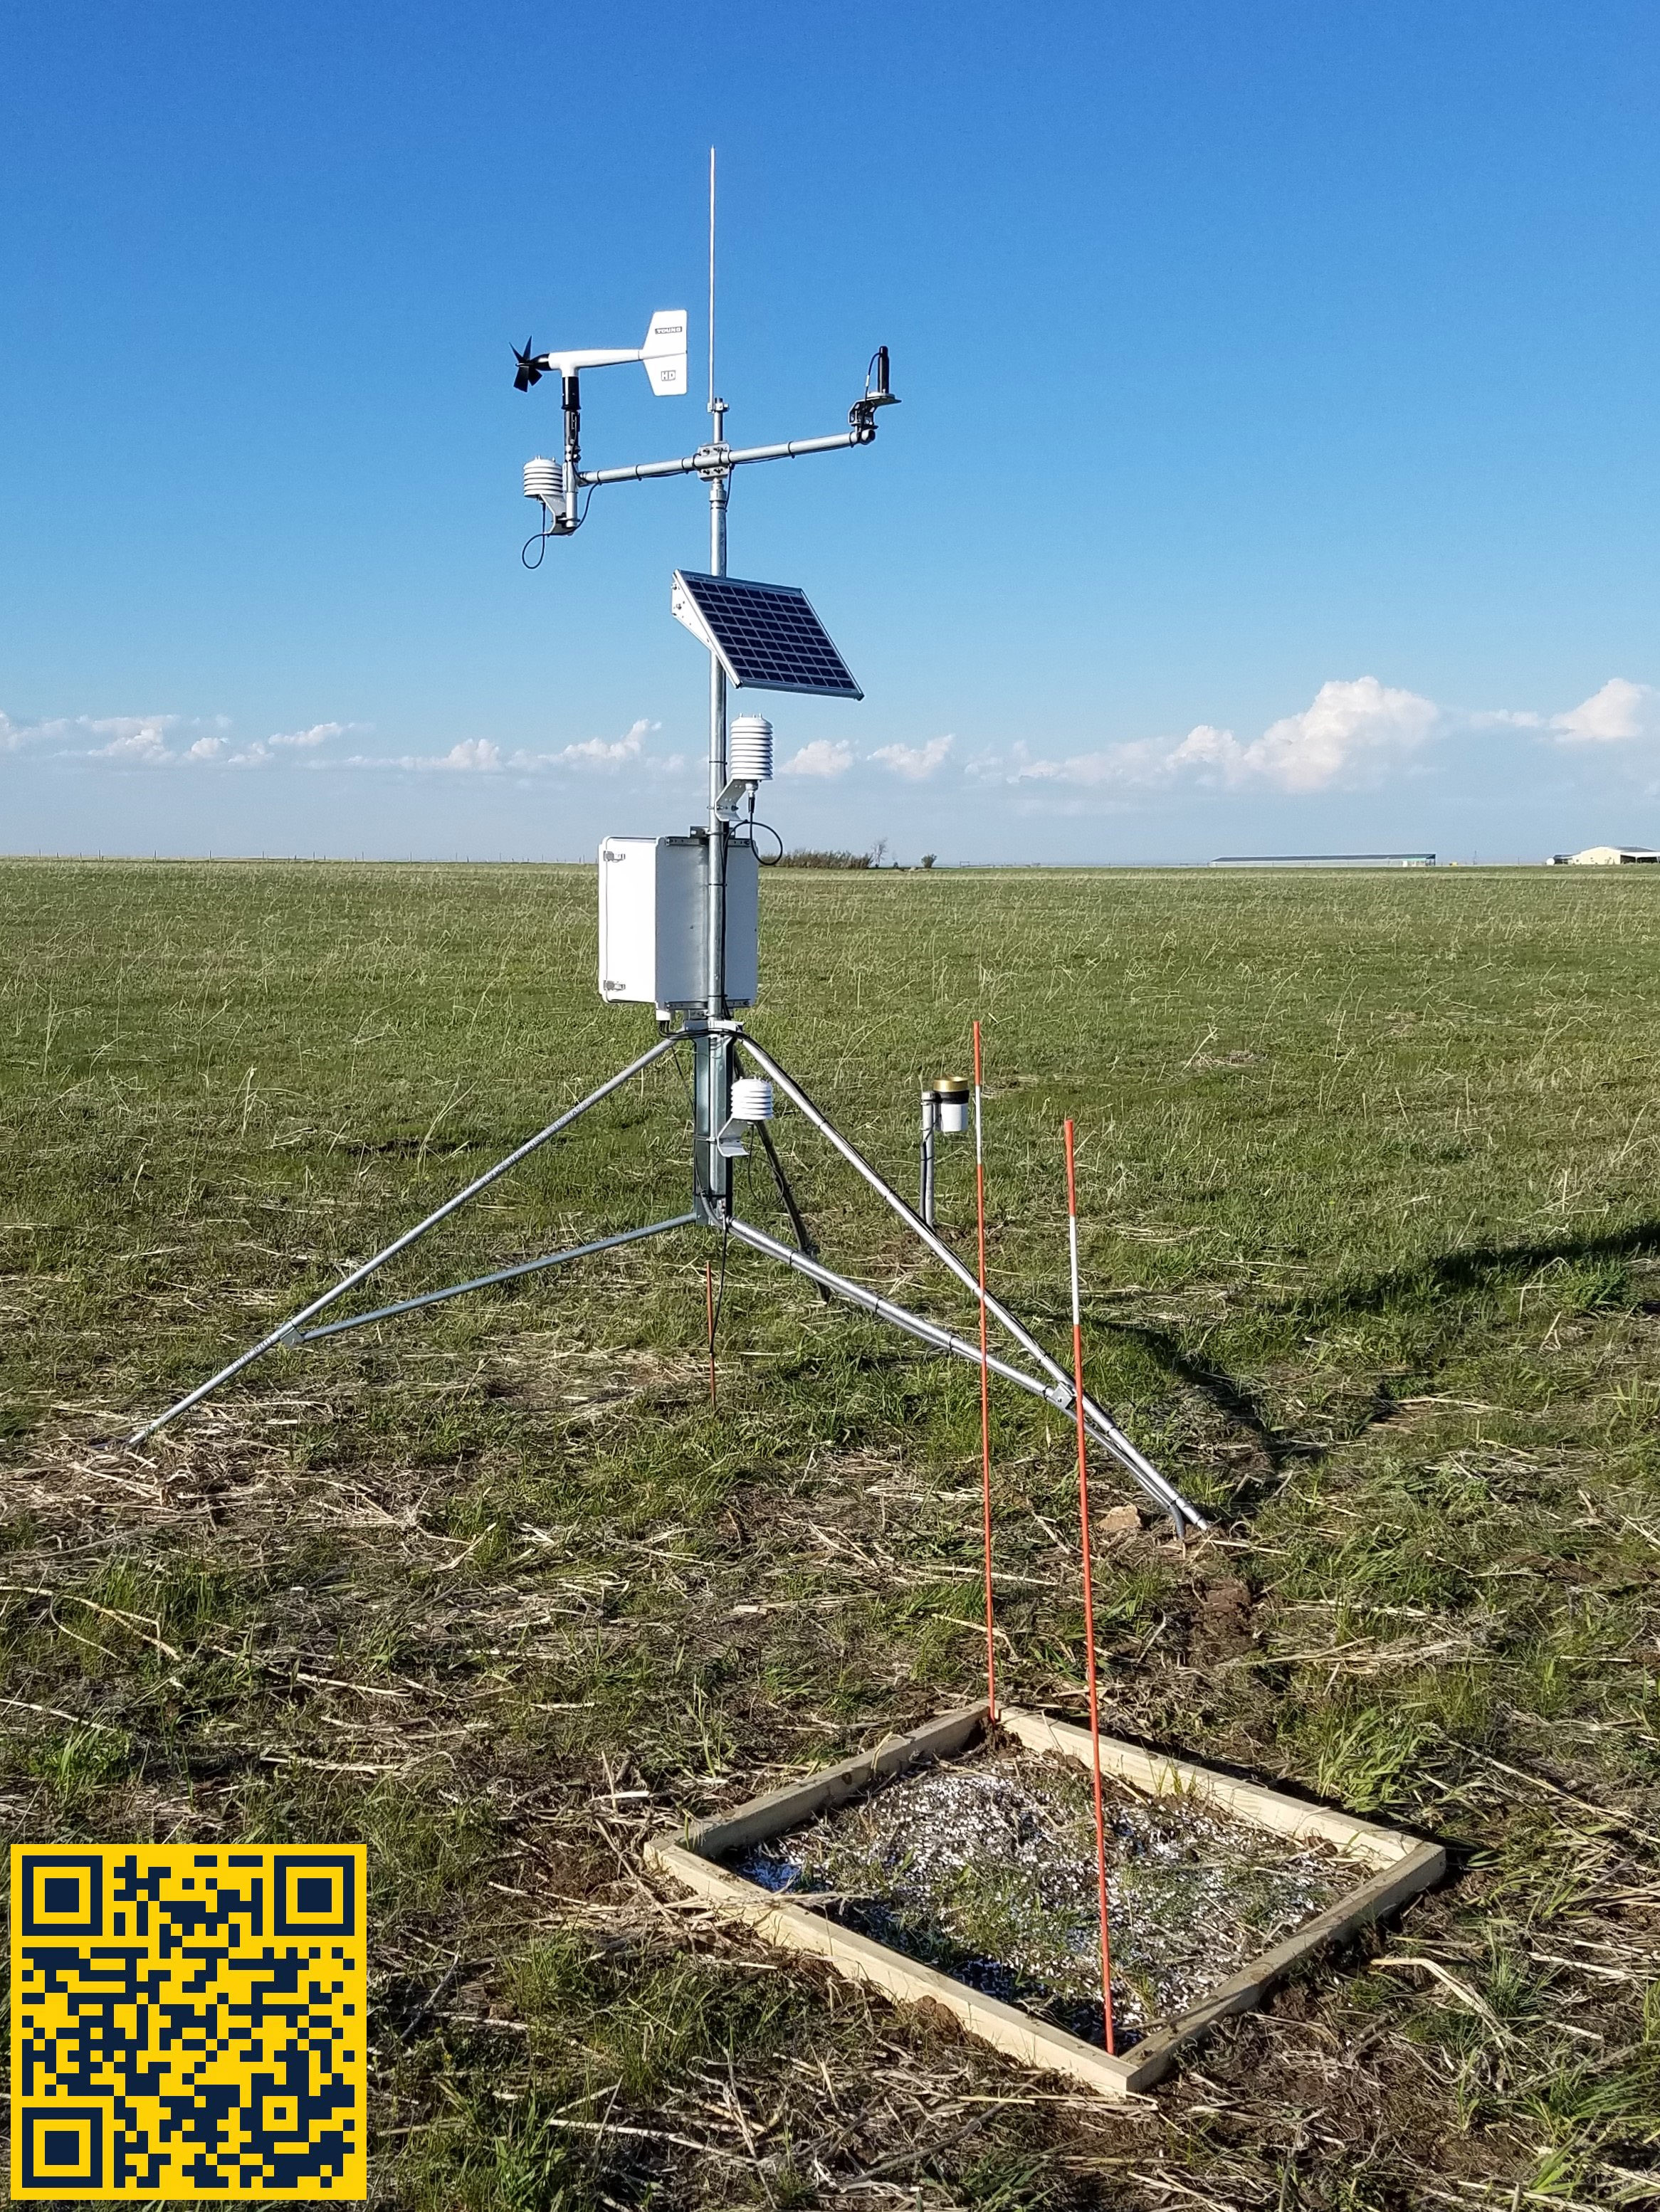 an image of outdoor weather monitoring equipment in a field